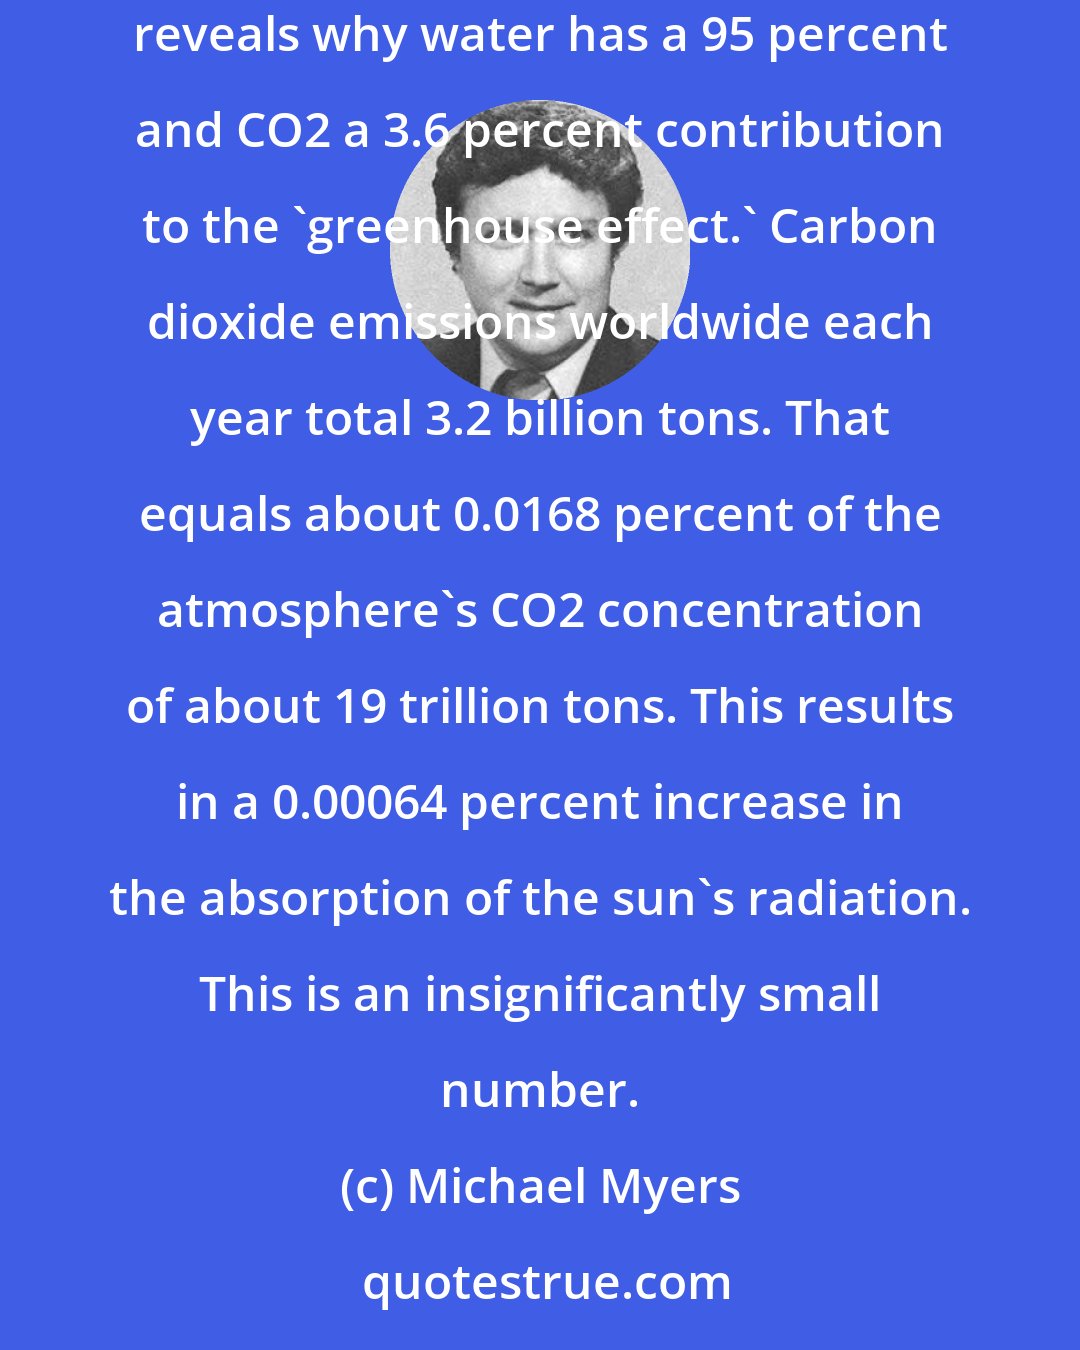 Michael Myers: I am troubled by the lack of common sense regarding carbon dioxide emissions. Our greatest greenhouse gas is water. Atmospheric spectroscopy reveals why water has a 95 percent and CO2 a 3.6 percent contribution to the 'greenhouse effect.' Carbon dioxide emissions worldwide each year total 3.2 billion tons. That equals about 0.0168 percent of the atmosphere's CO2 concentration of about 19 trillion tons. This results in a 0.00064 percent increase in the absorption of the sun's radiation. This is an insignificantly small number.